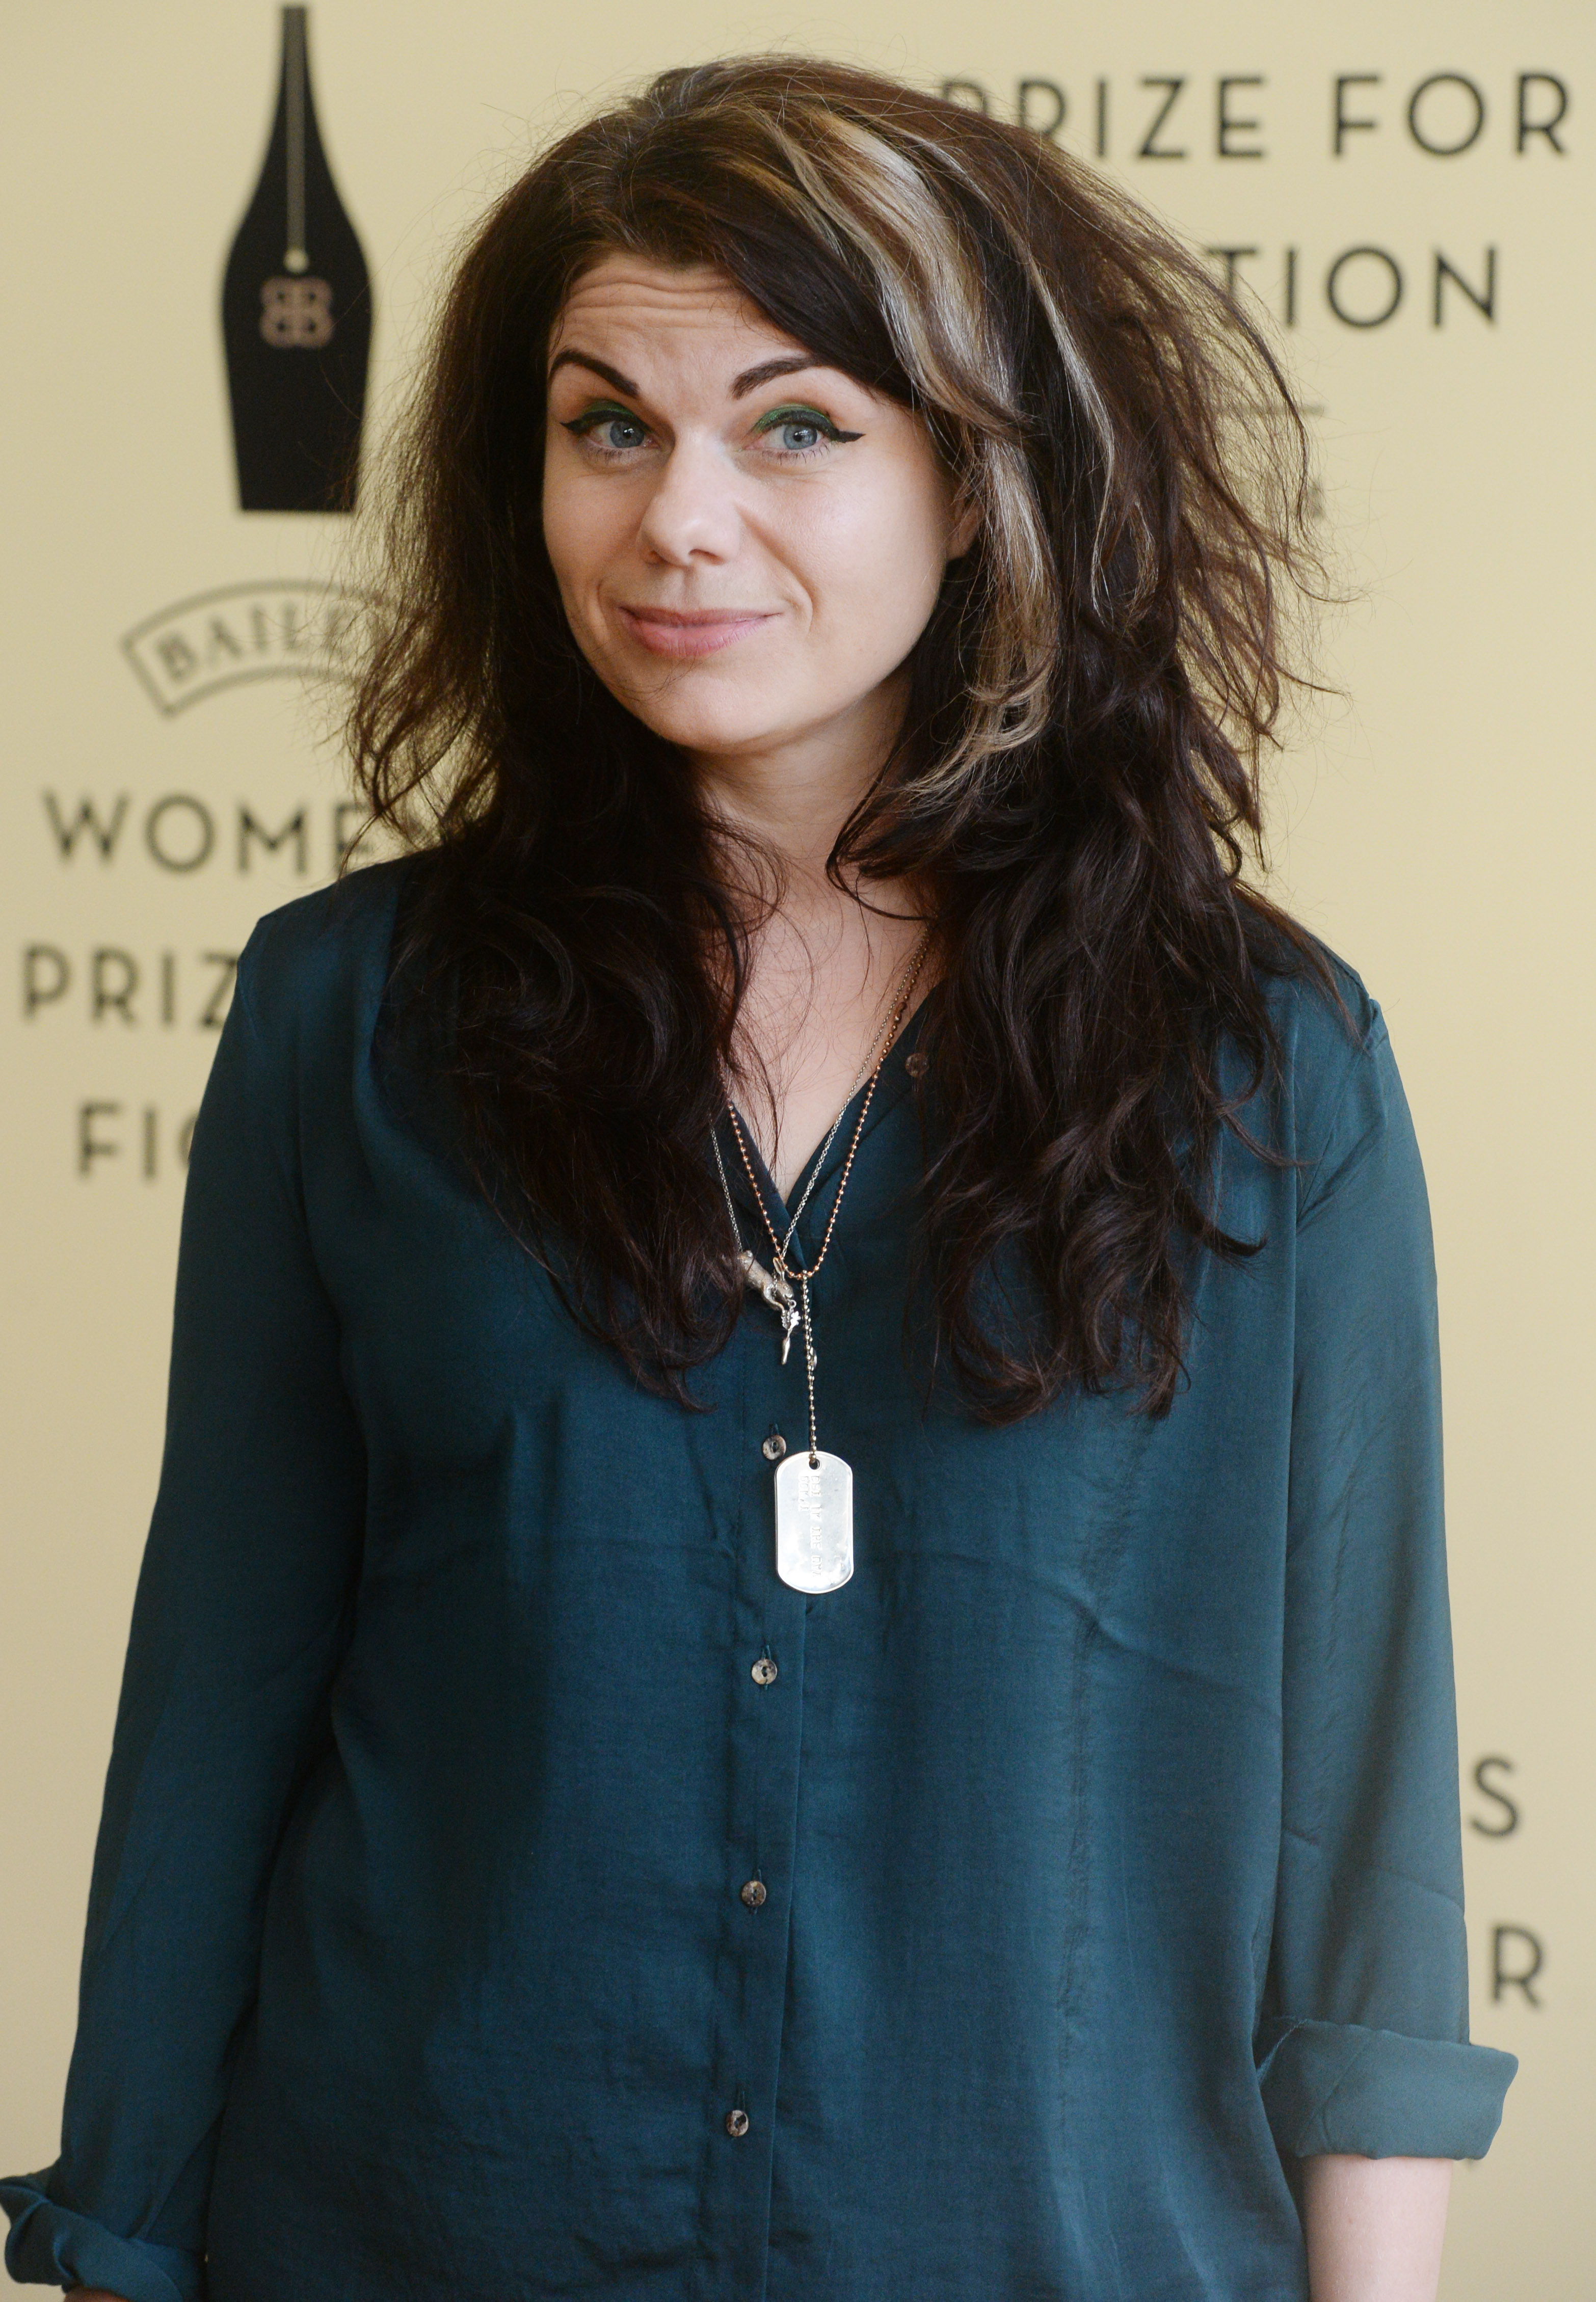 Caitlin Moran at the "Baileys Women's Prize For Fiction" at Royal Festival Hall in London on June 4, 2014. (Splash News/Corbis)